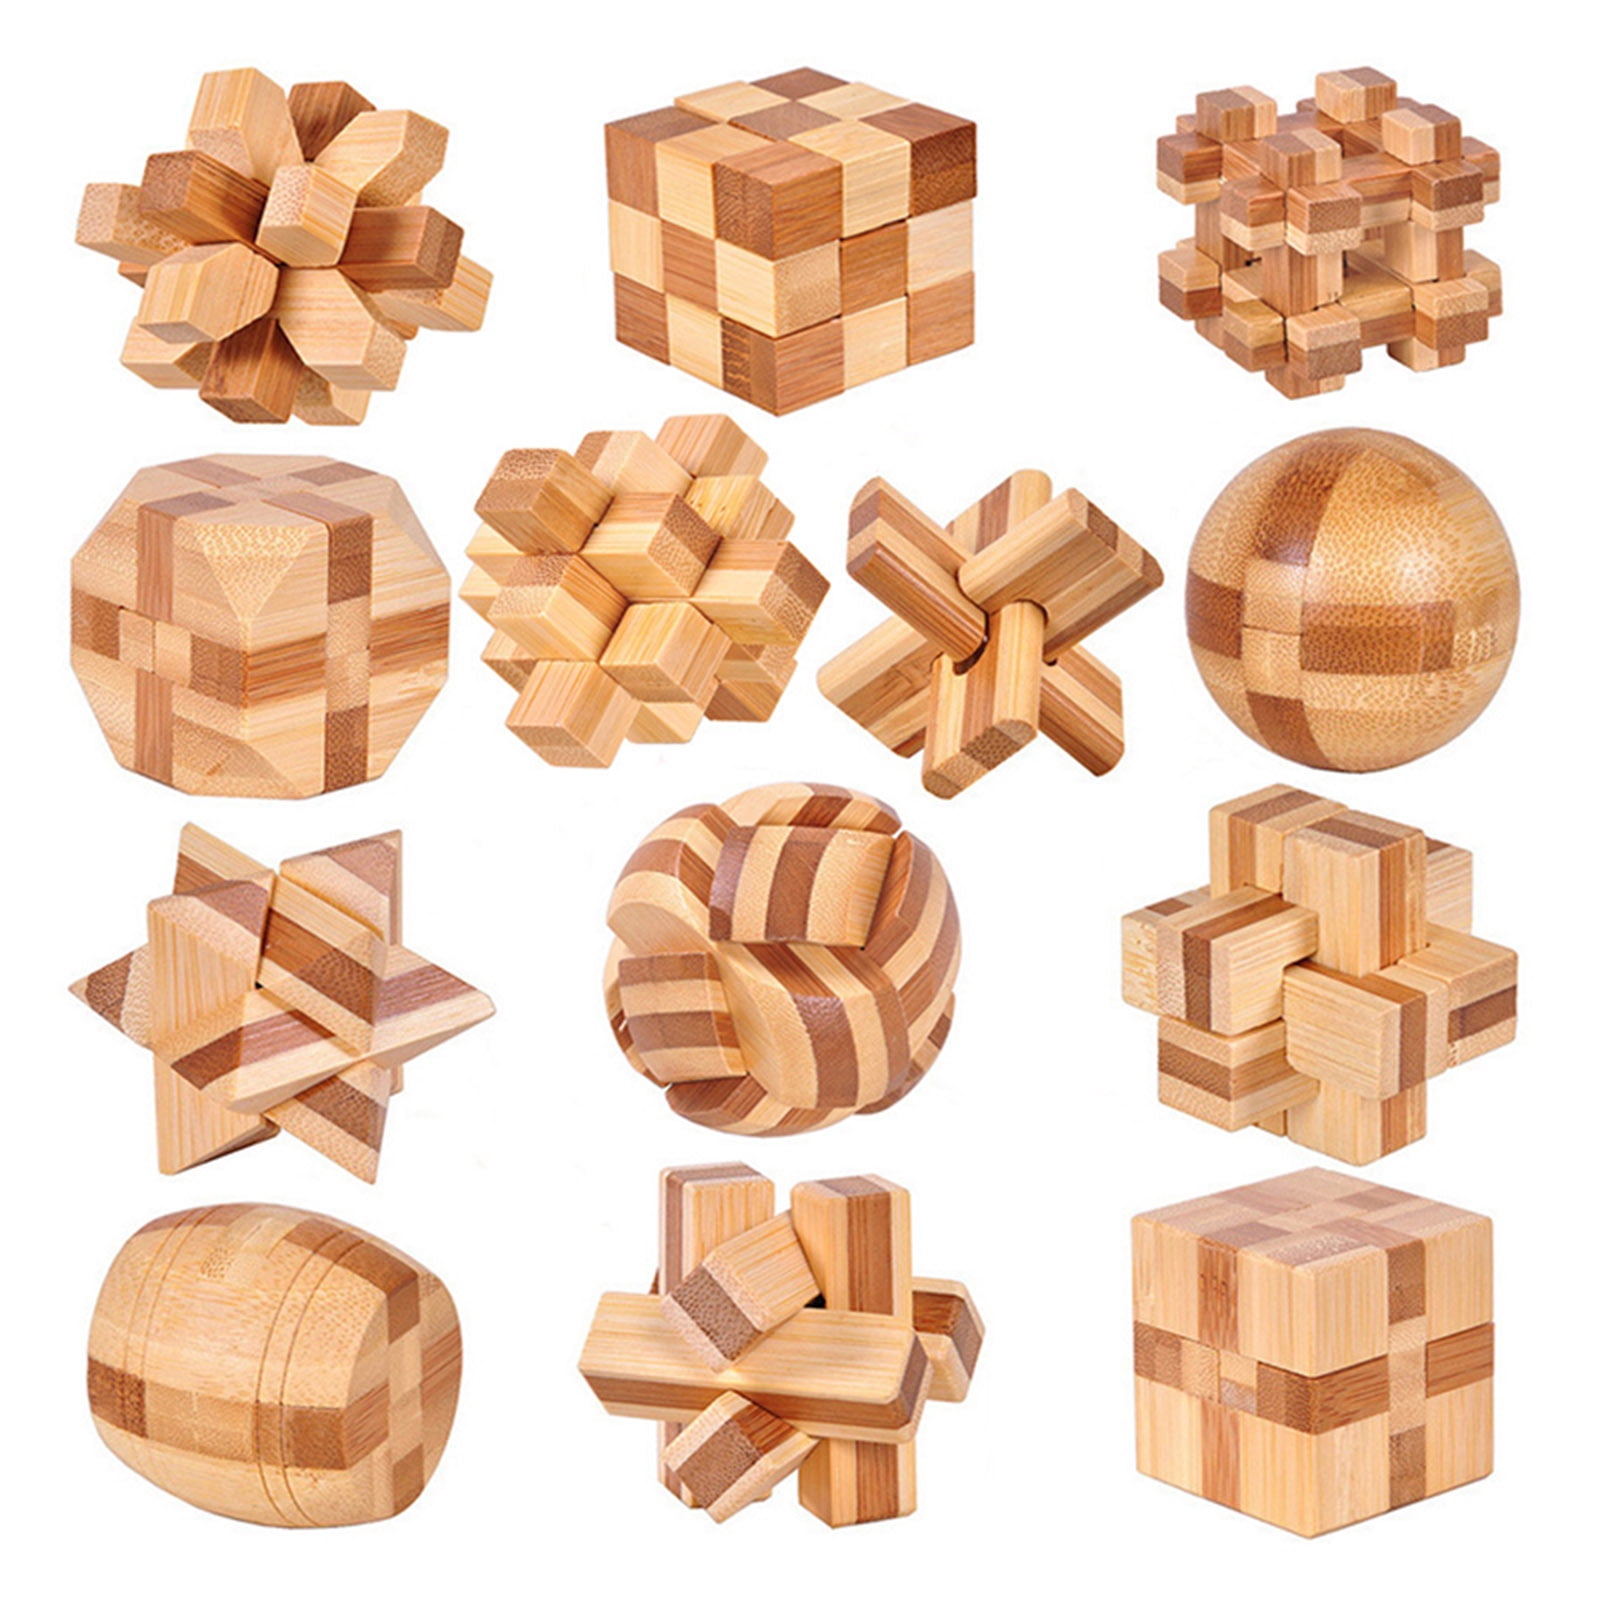 Kids Toys Wooden Gadget Intelligence Puzzle toys Adults Kong Ming Lock IQ test # 